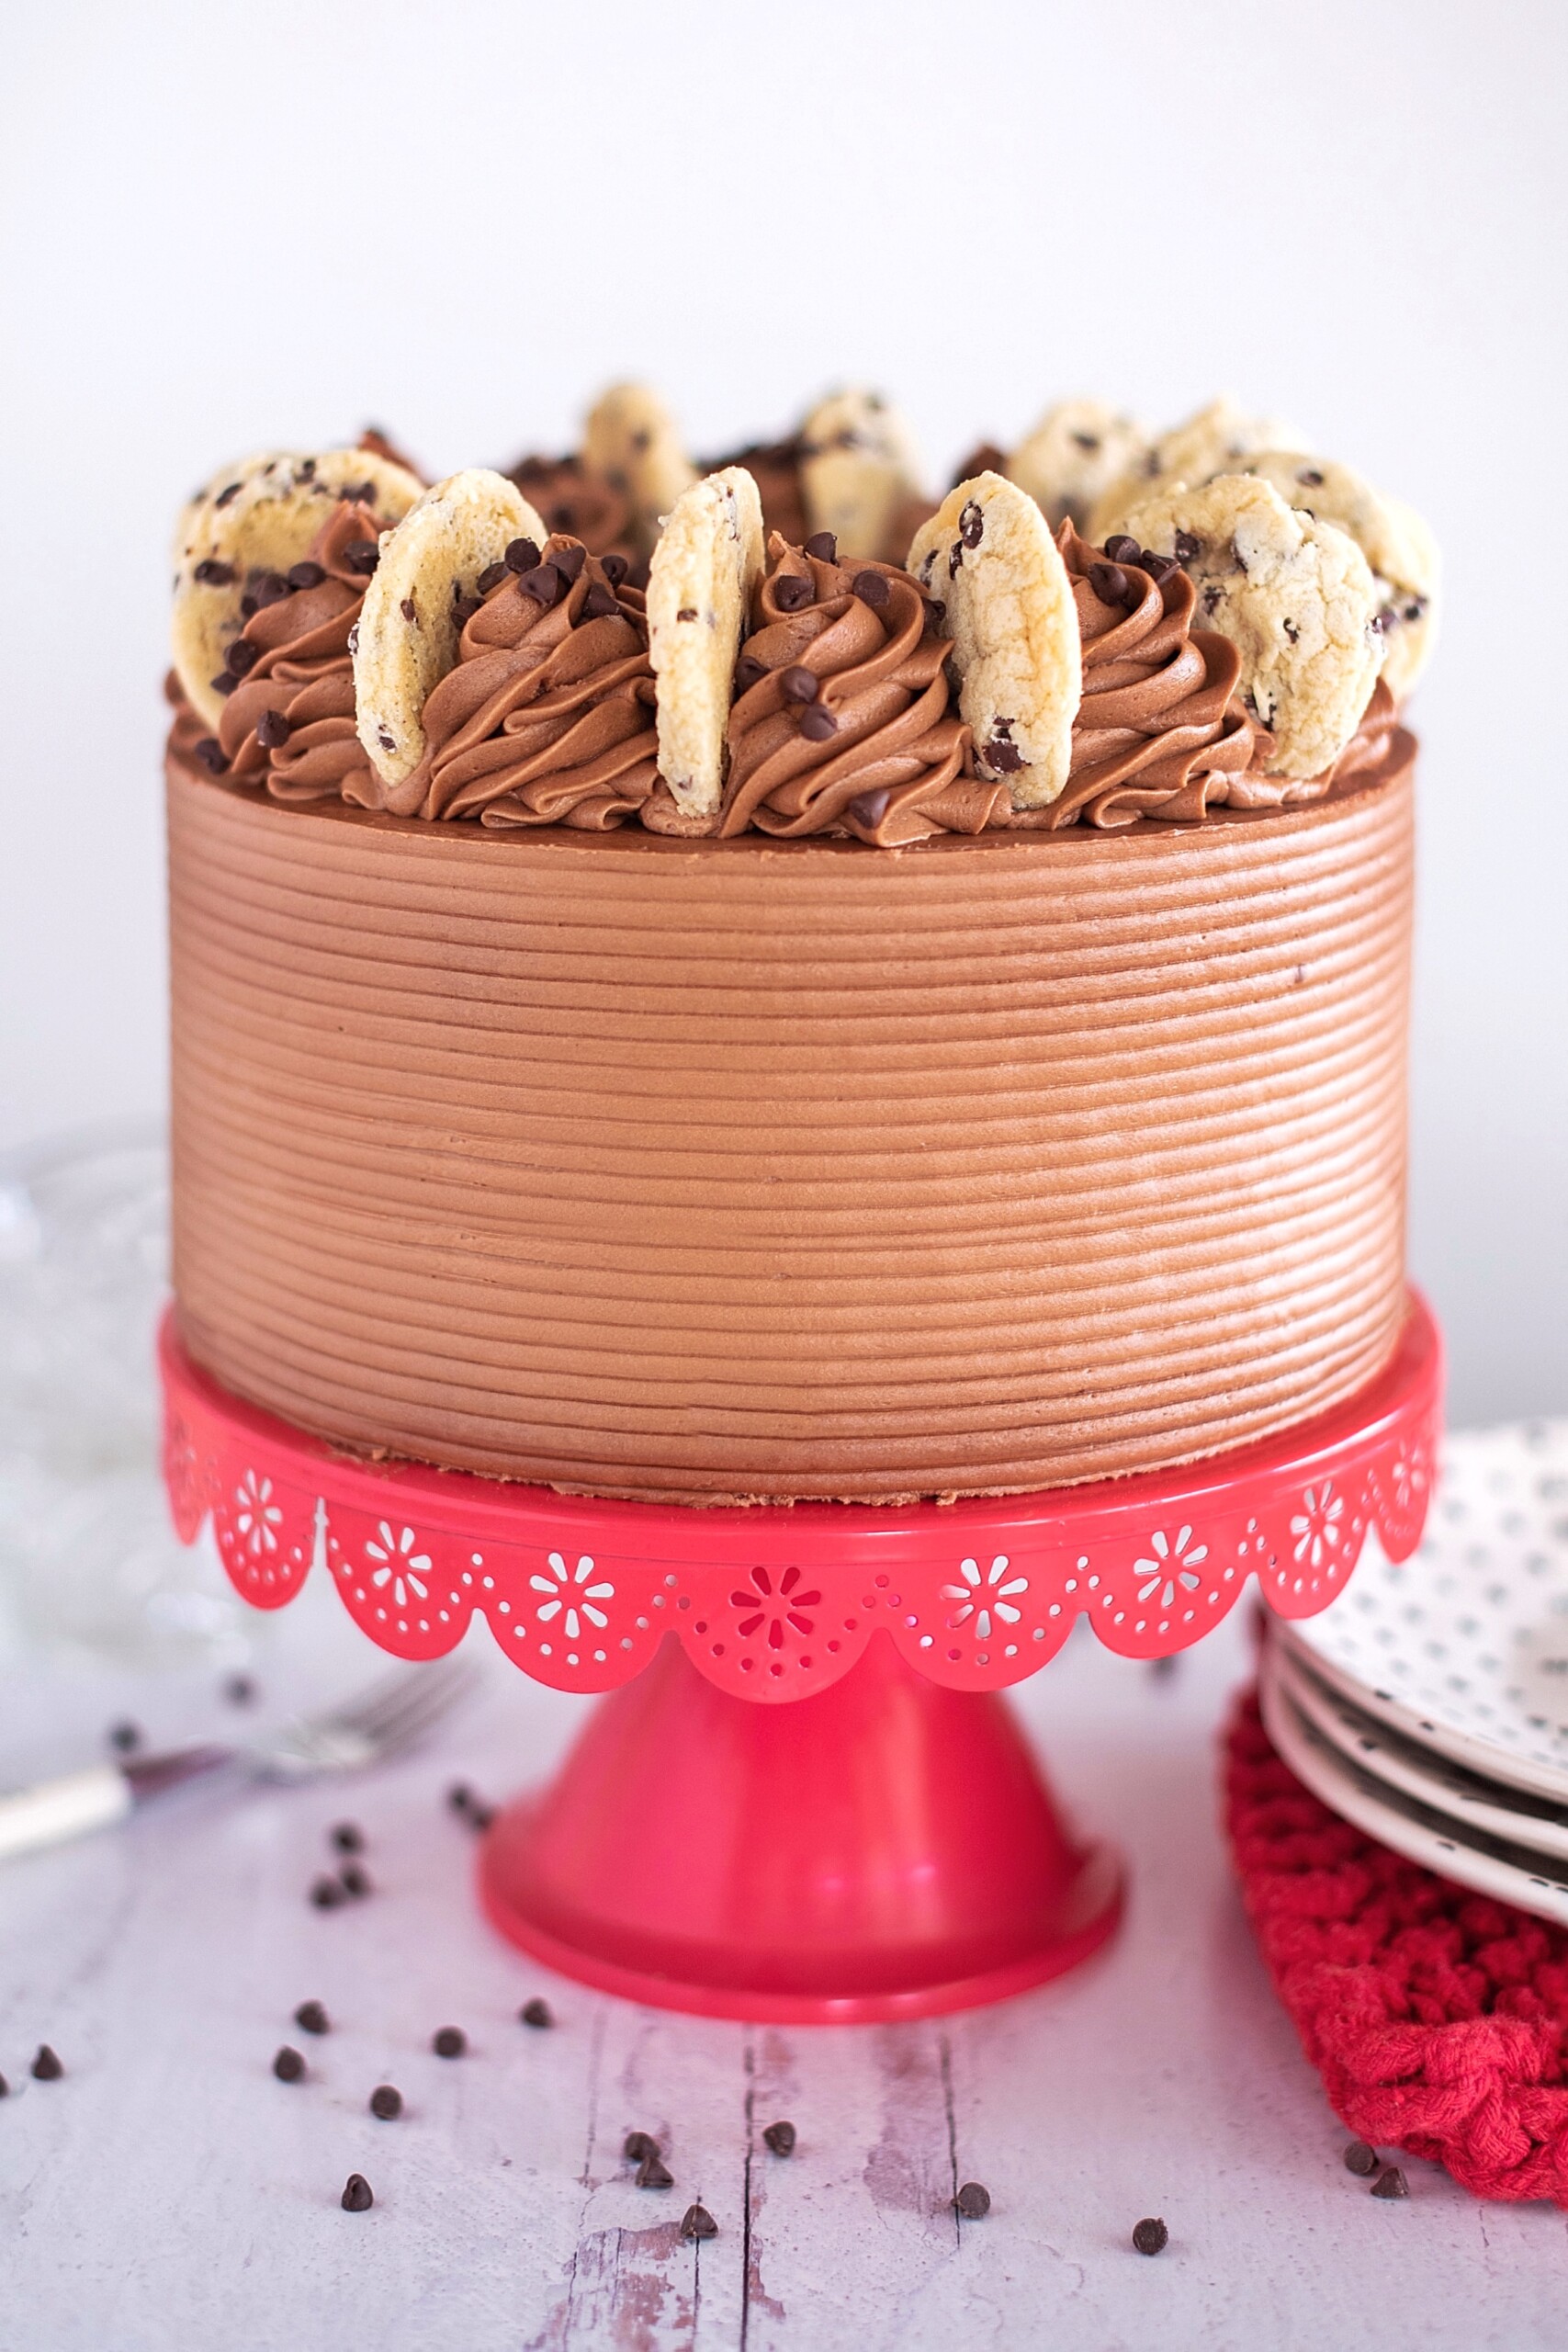 Red velvet cake layers with chocolate chip cookie and chocolate cream cheese frosting.